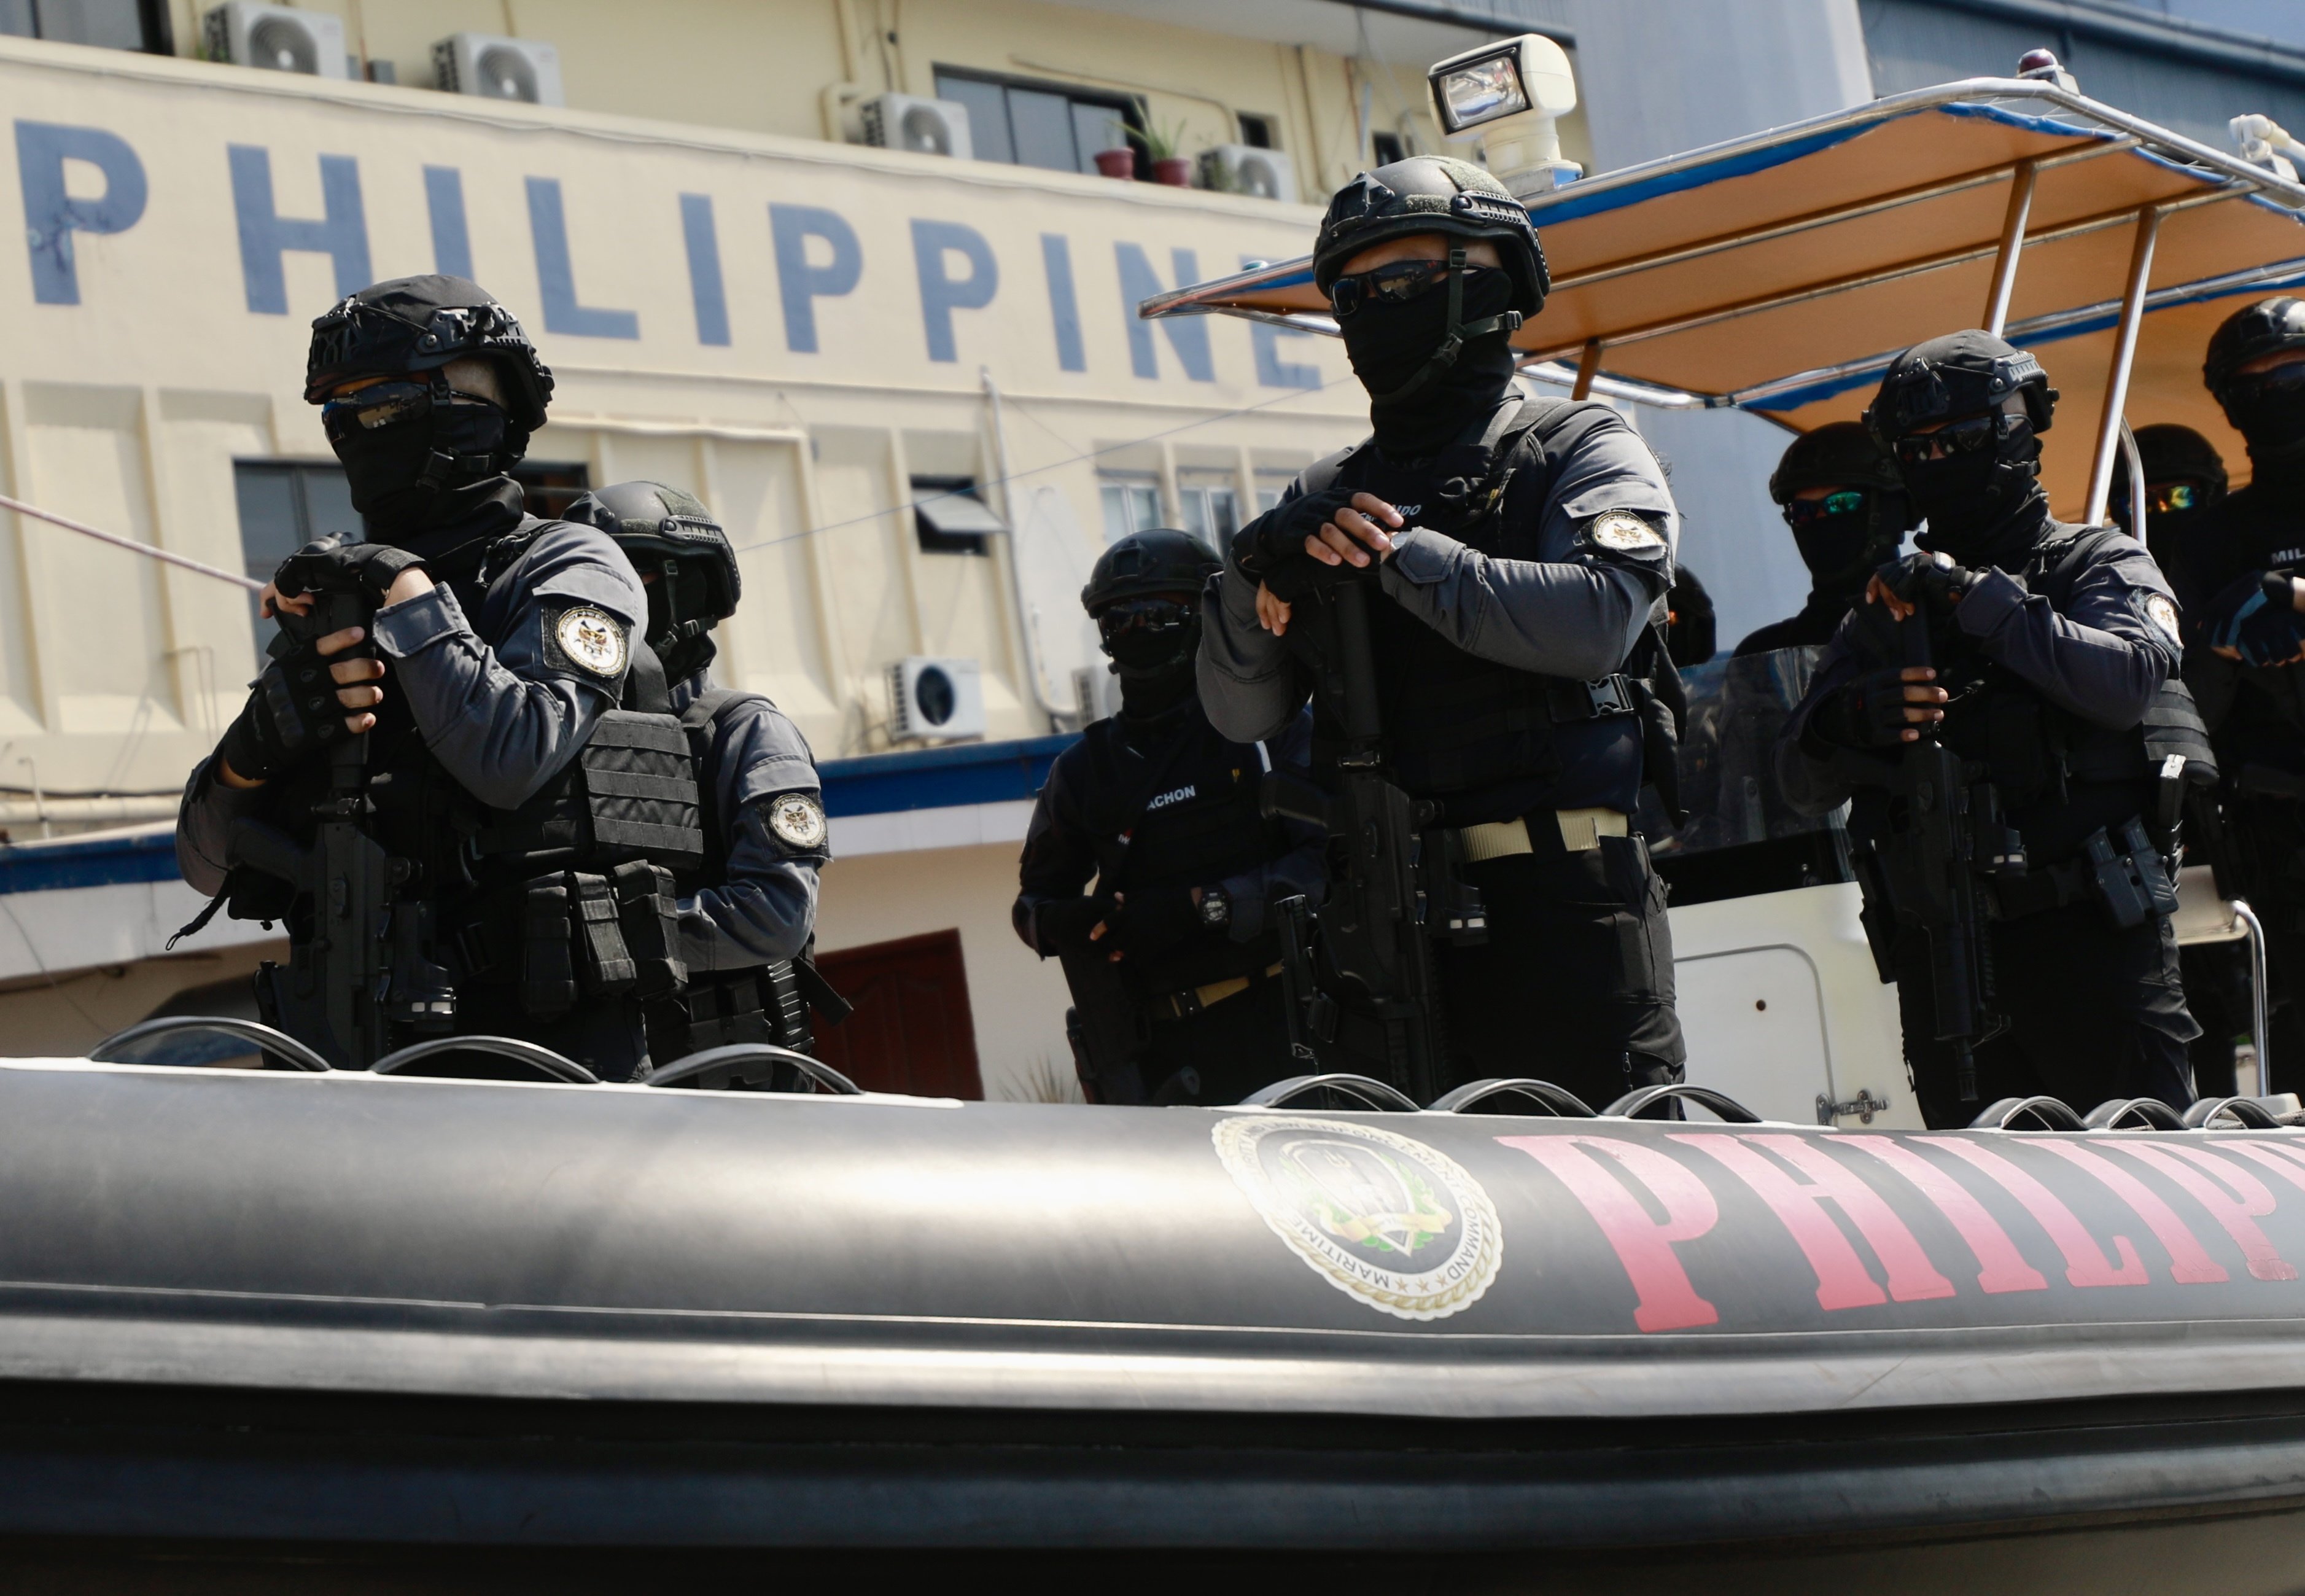 Philippine coastguard personnel on a rubber boat at a ceremony at a seaport in Manila. Photo: EPA-EFE